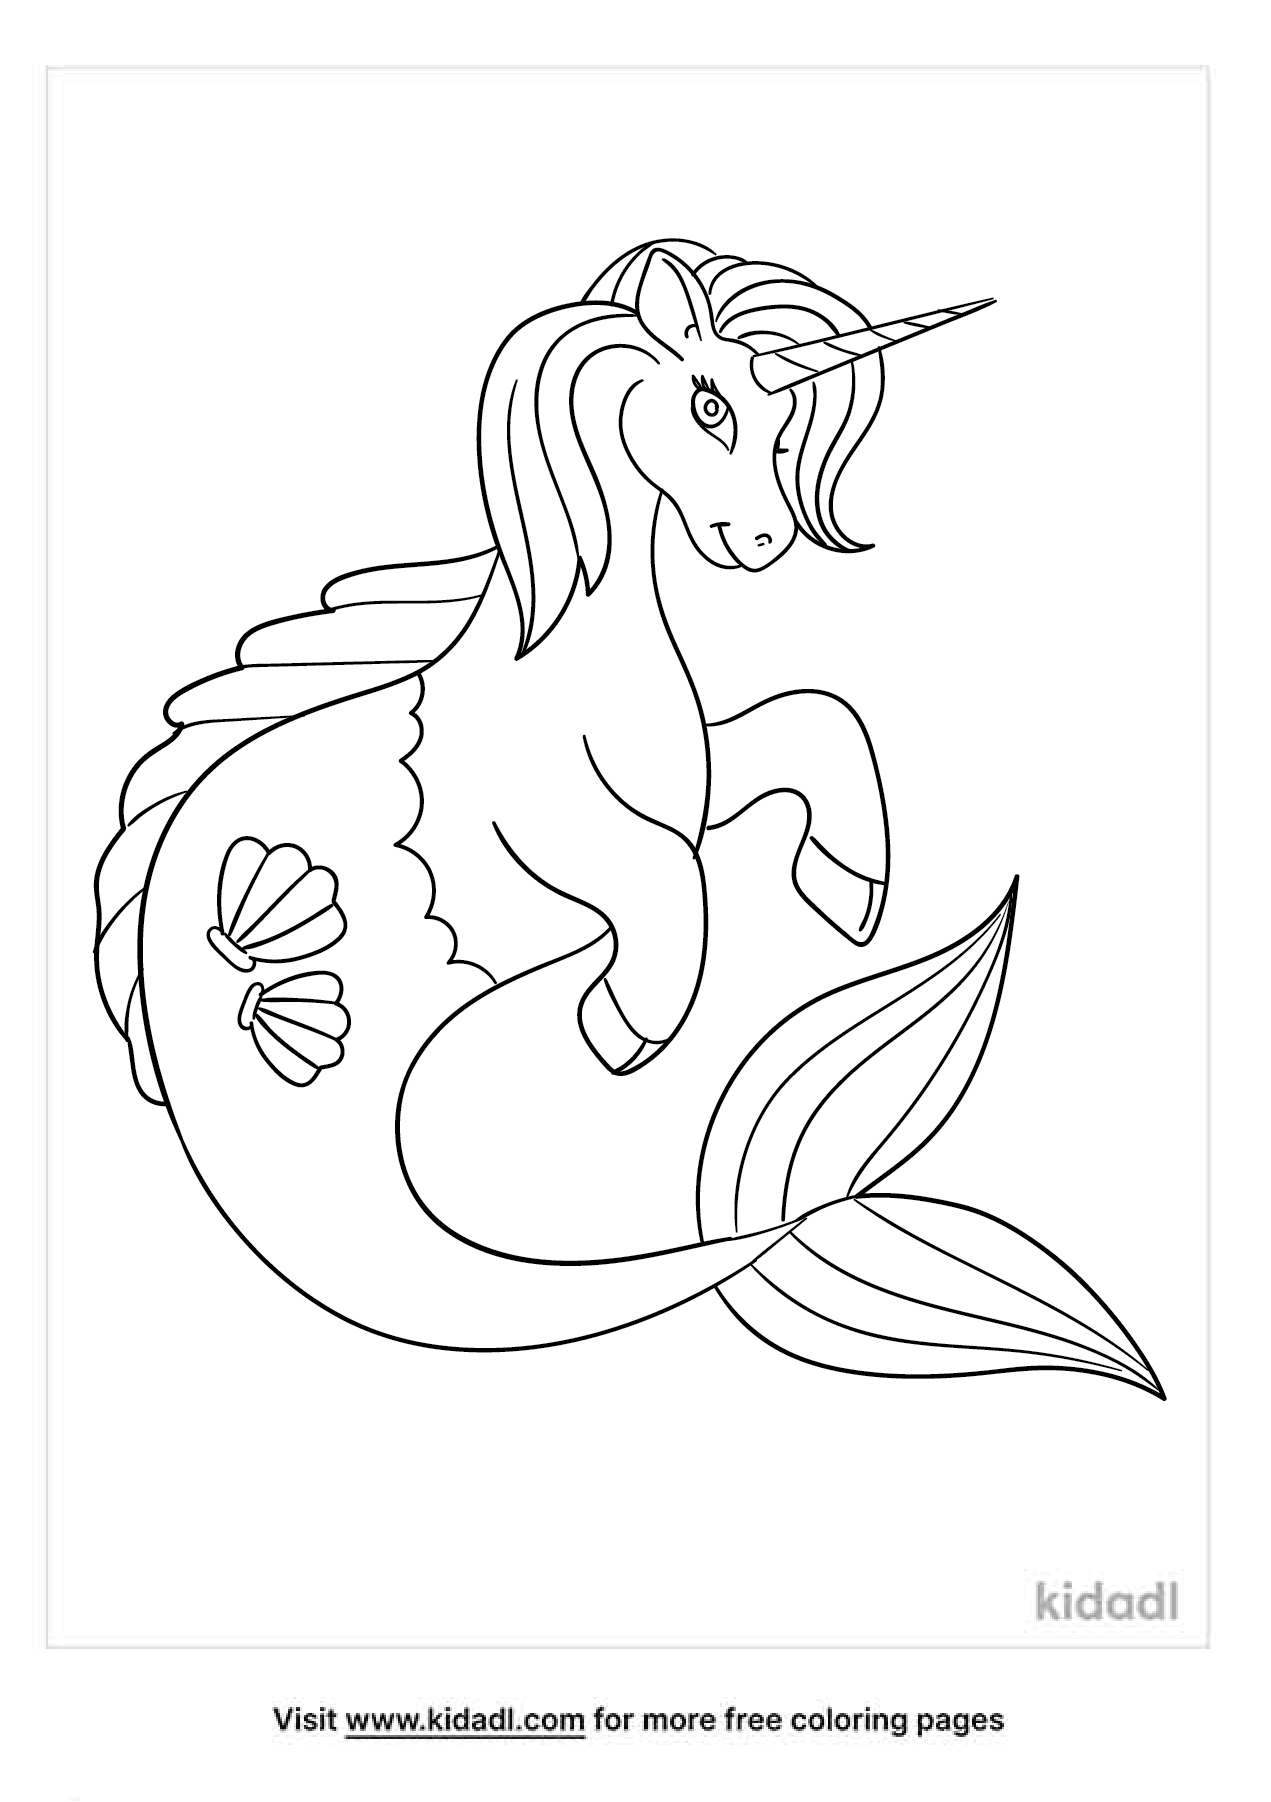 Unicorn Mermaid Coloring Pages | Free Unicorns Coloring Pages | Kidadl